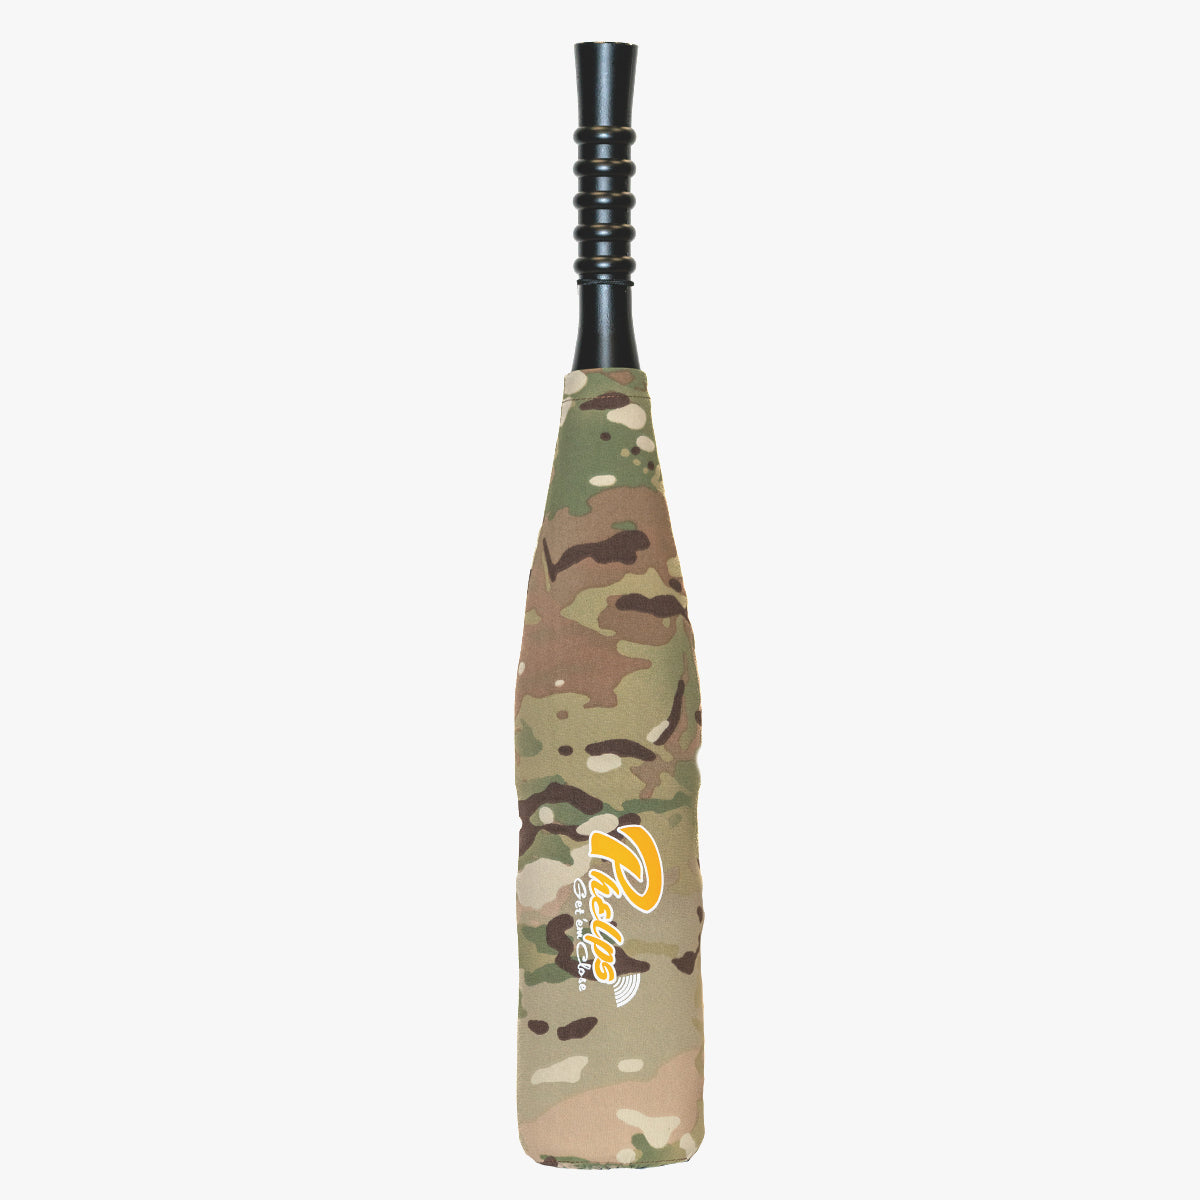 GOHUNT Ripper 2.0 Bugle Tube by Phelps Game Calls in  by GOHUNT | Phelps Game Calls - GOHUNT Shop